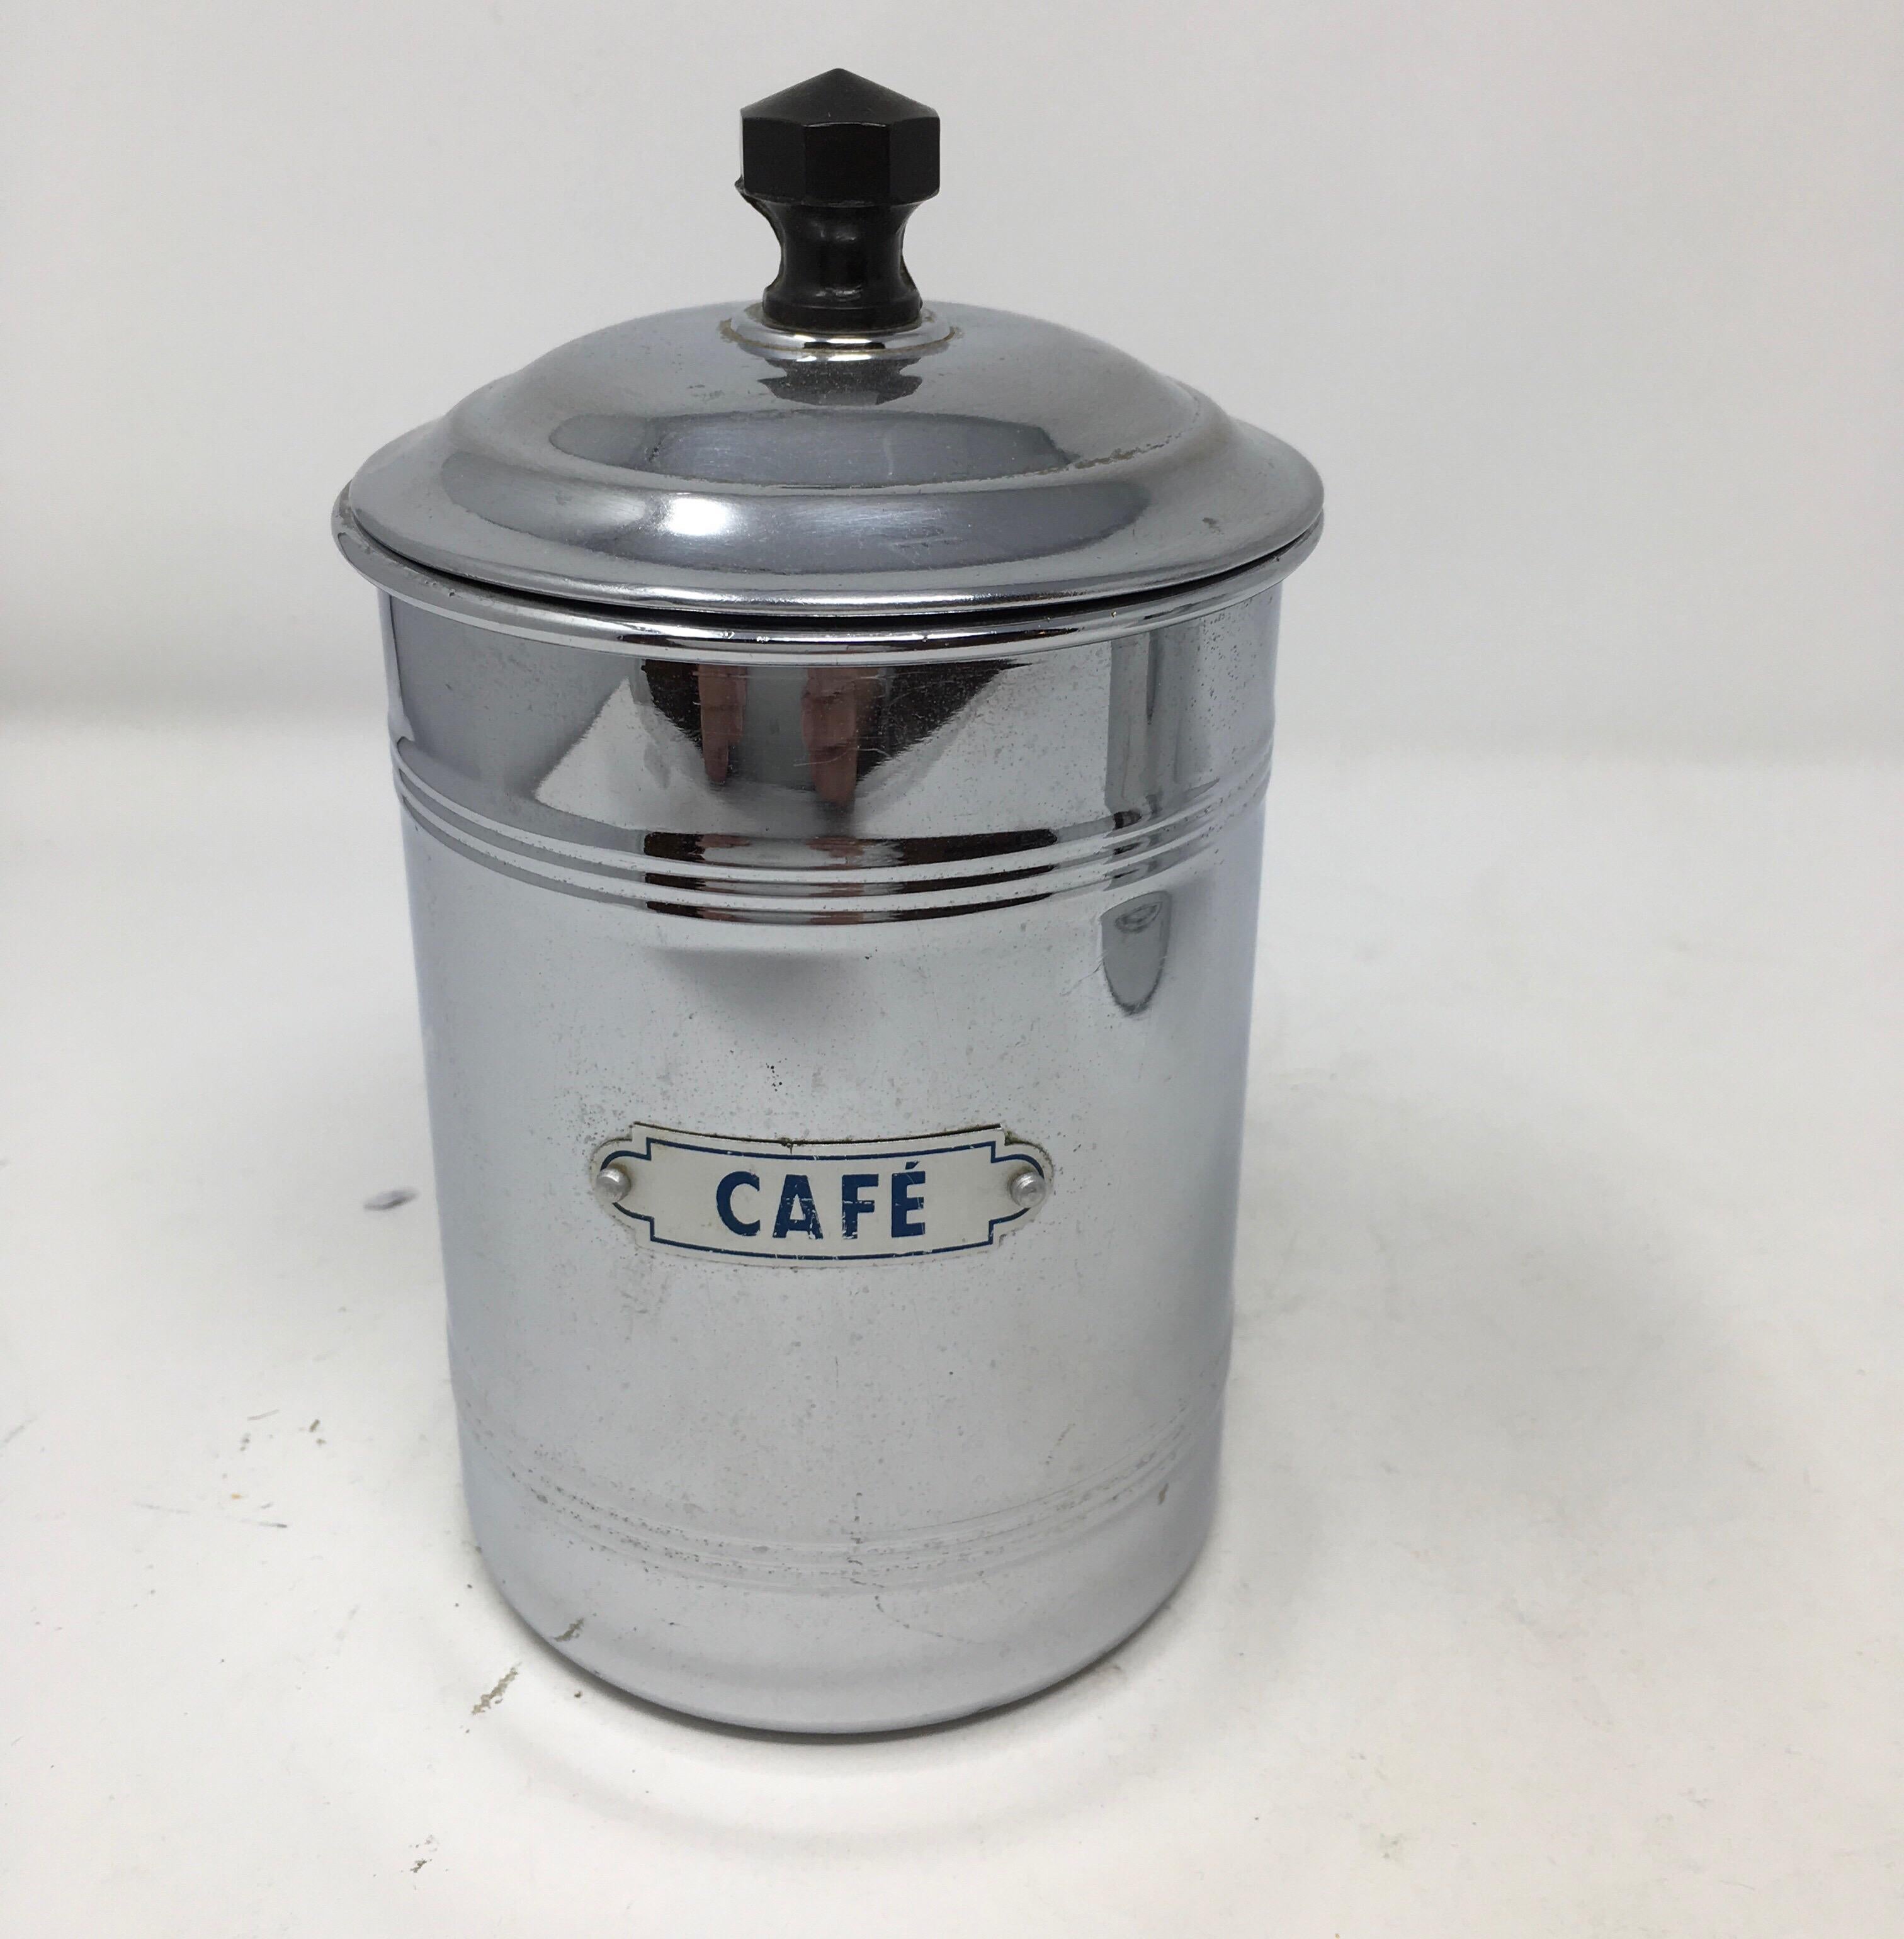 We found this French antique aluminum three-piece coffee set of canisters, circa 1920s in southern France. The charming canisters are complete with their original lids and black handles and name plates. Once a staple in every French kitchen, the